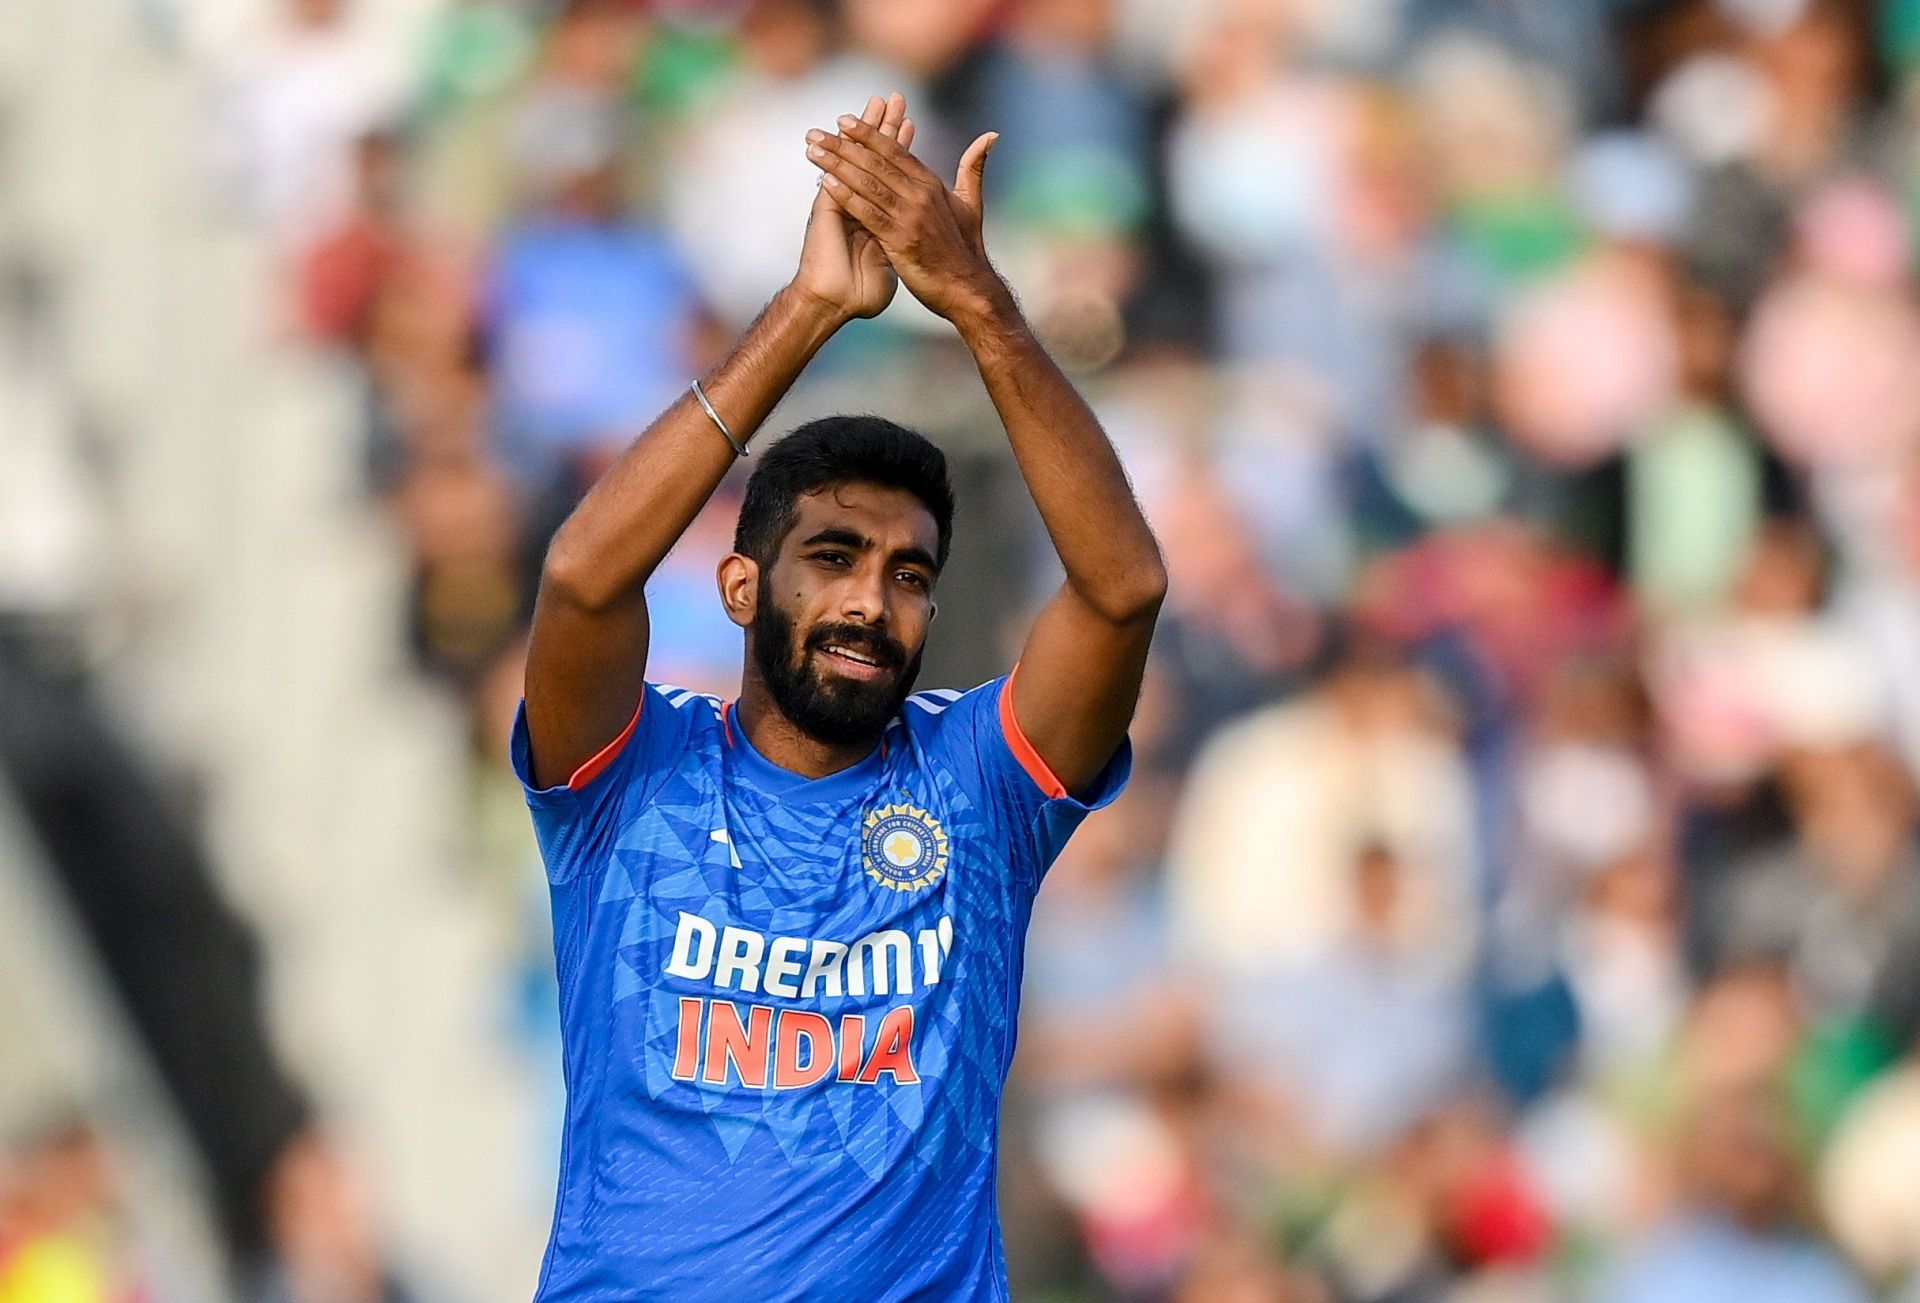 Jasprit Bumrah was happy as Team India sealed the series with a win in the second T20I